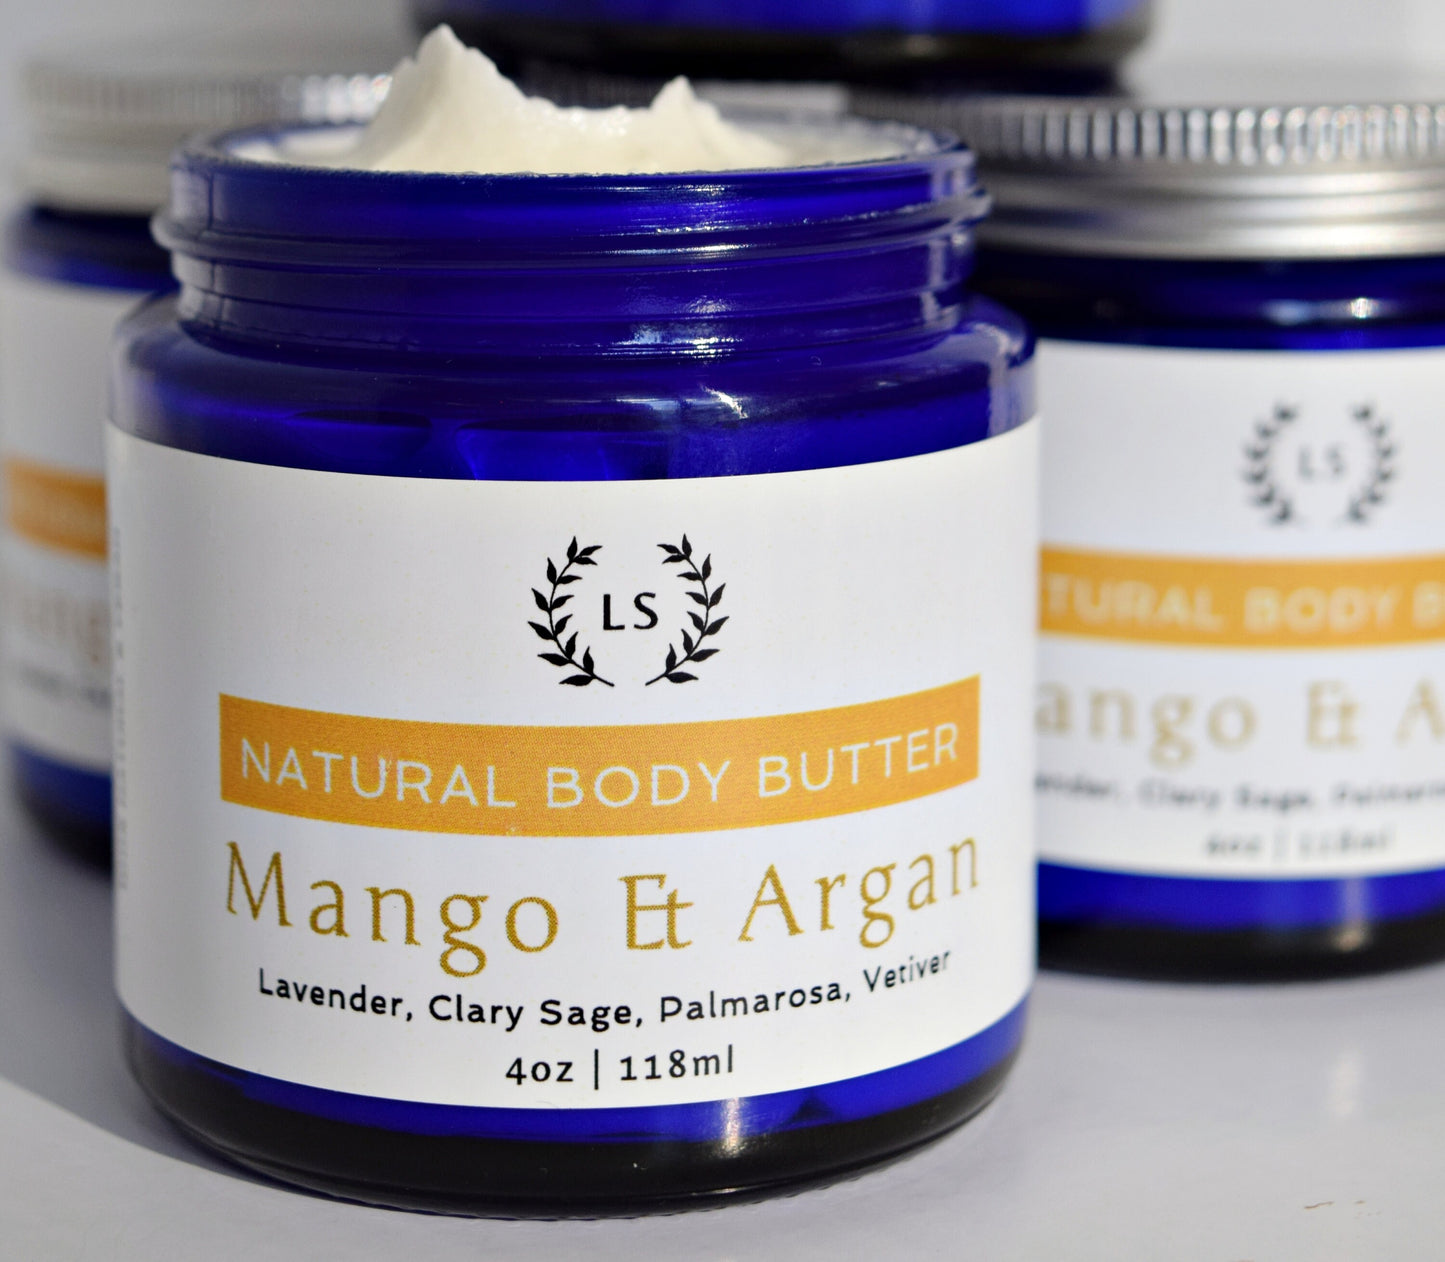 natural body butter with mango and argan